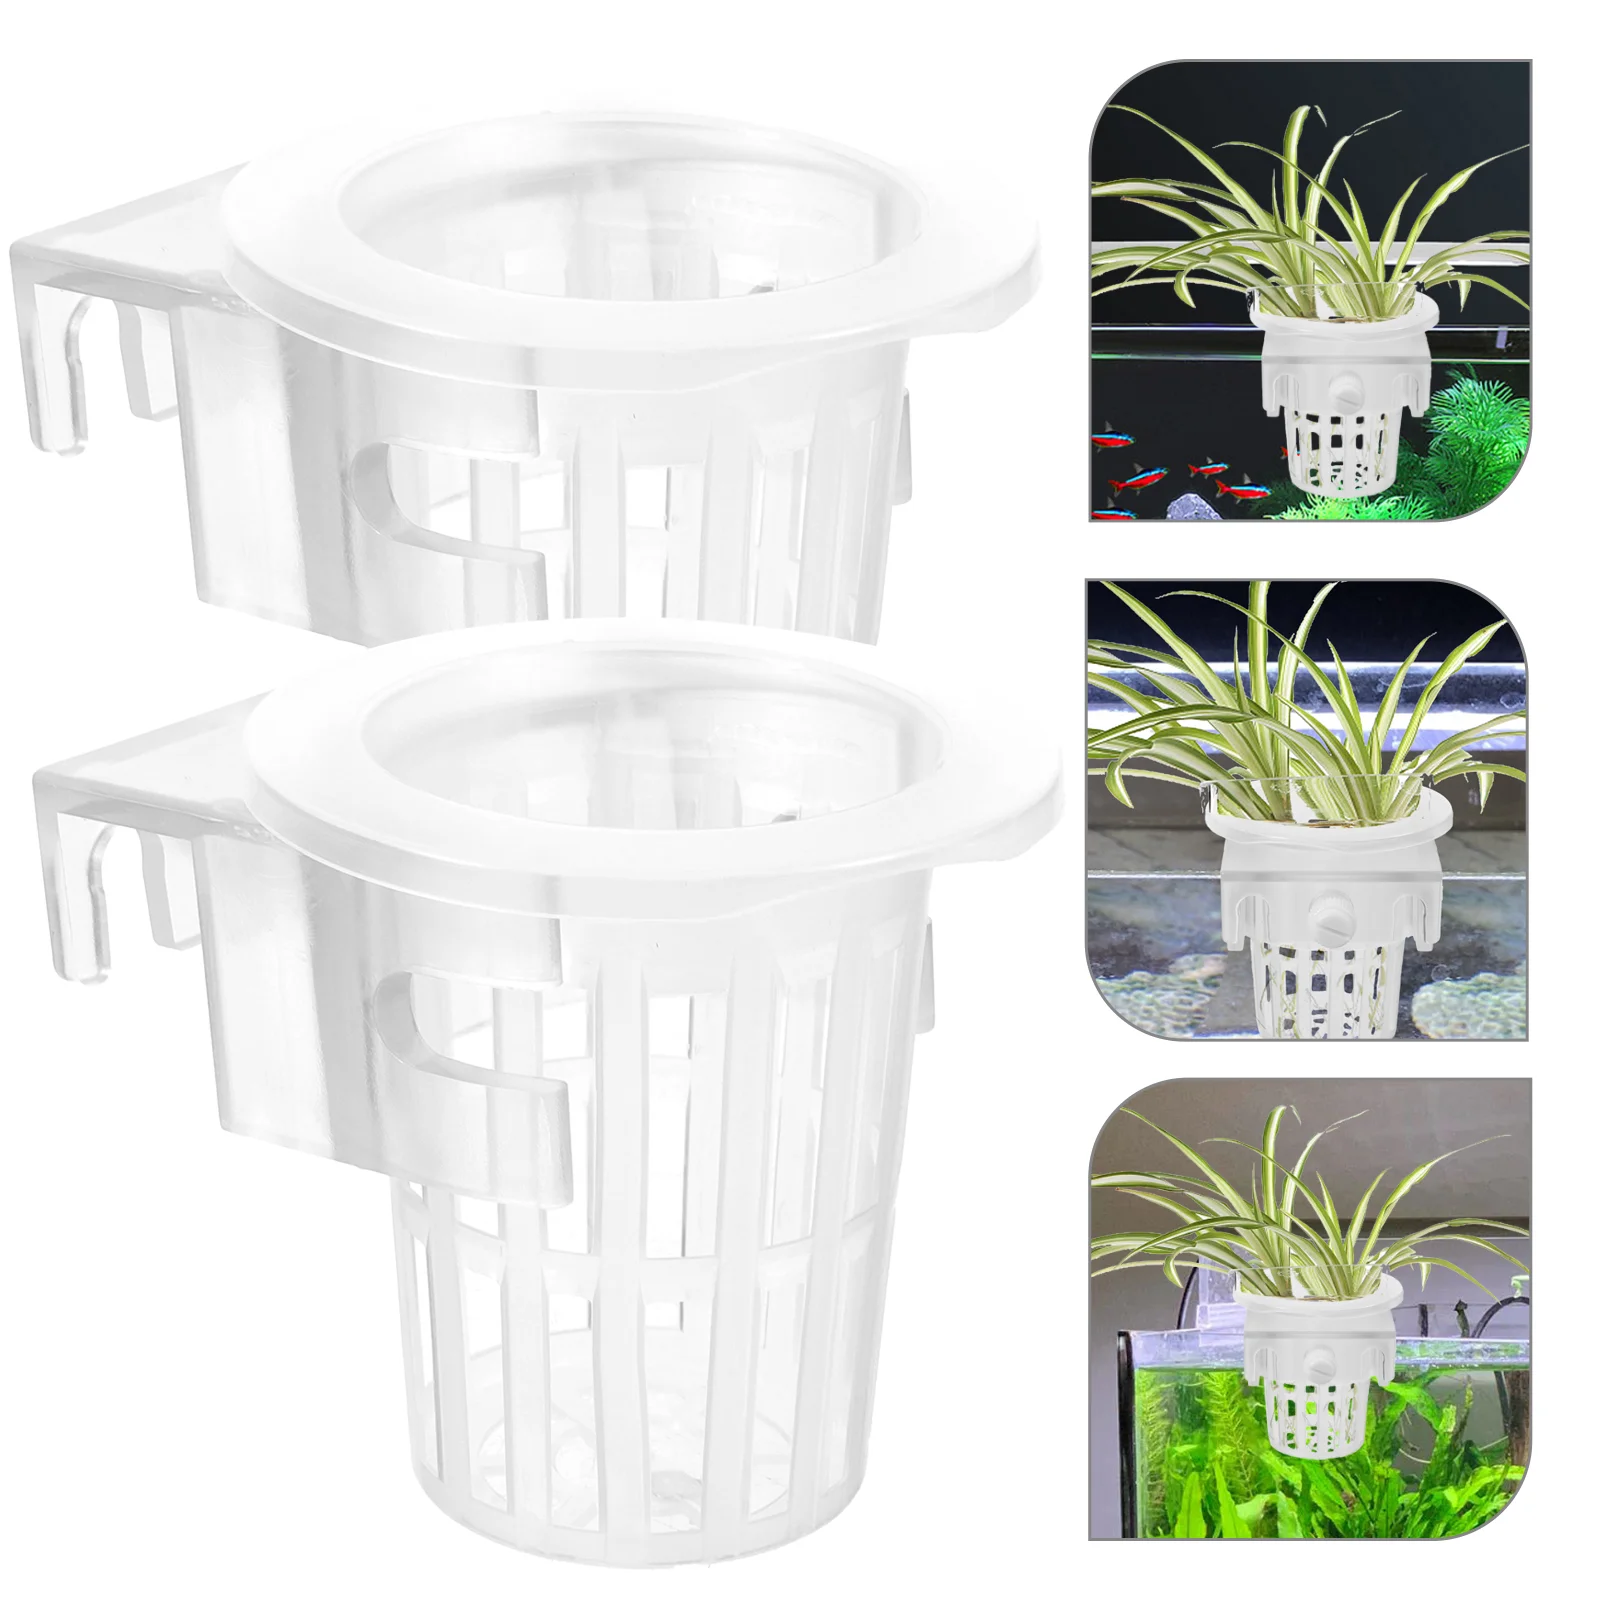 

Basket Garden Containers Plastic Planting Water Hanging Hydroponic Cup Pots Net Cups Hydroponics